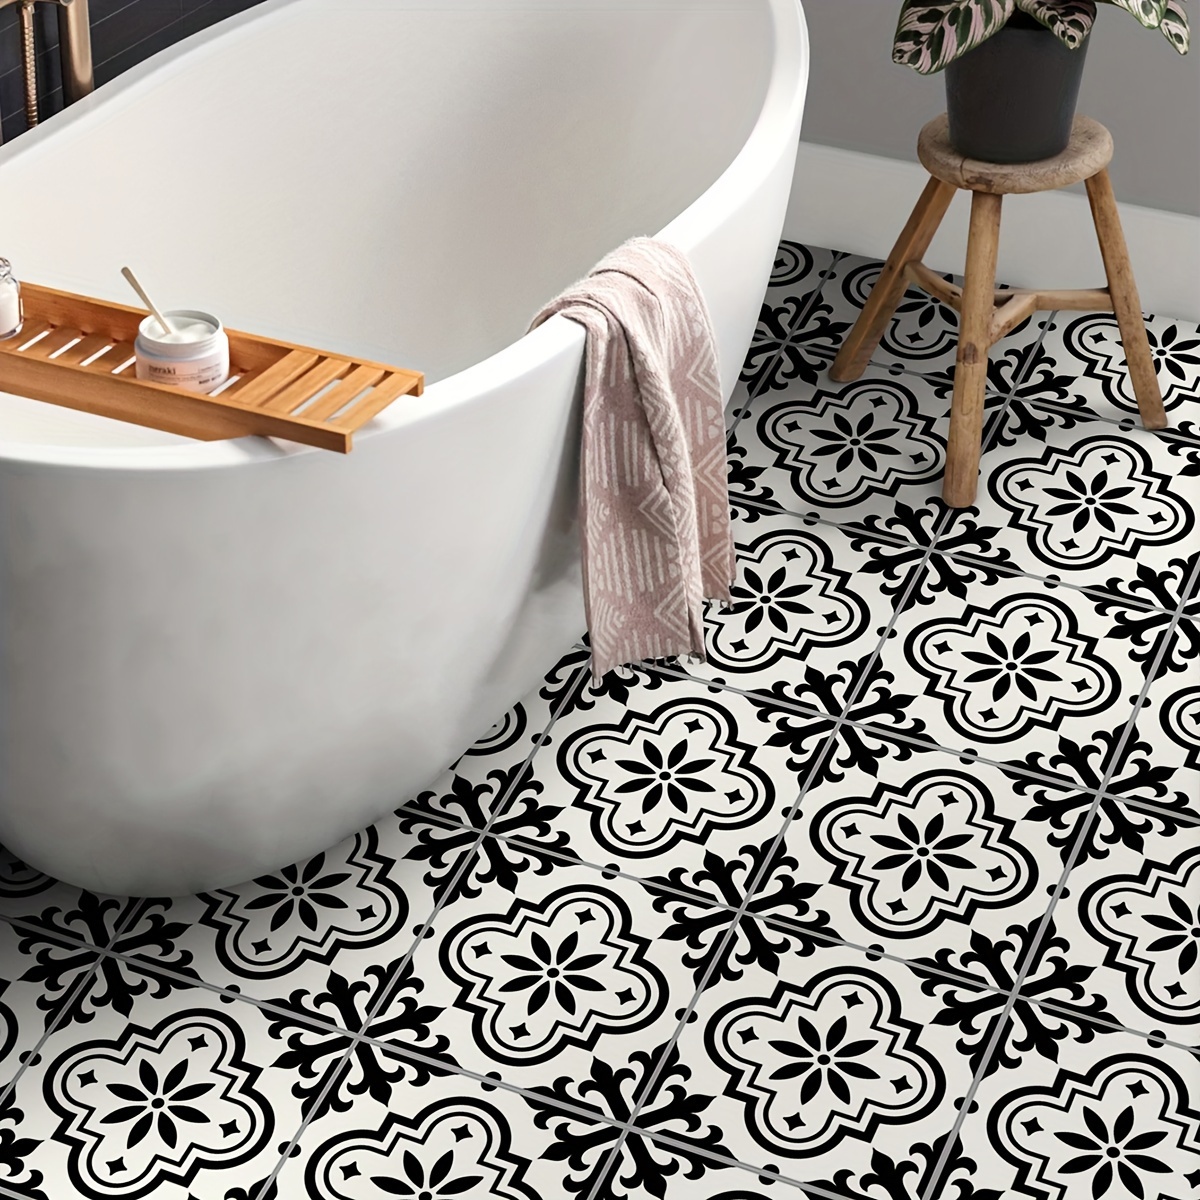 

12pcs Moroccan Style Black And White Mixed Color Floor Stickers, Waterproof Non-slip Home Decoration, Self-adhesive Tile Stickers, Kitchen Toilet Wear-resistant Flower Tile Stickers